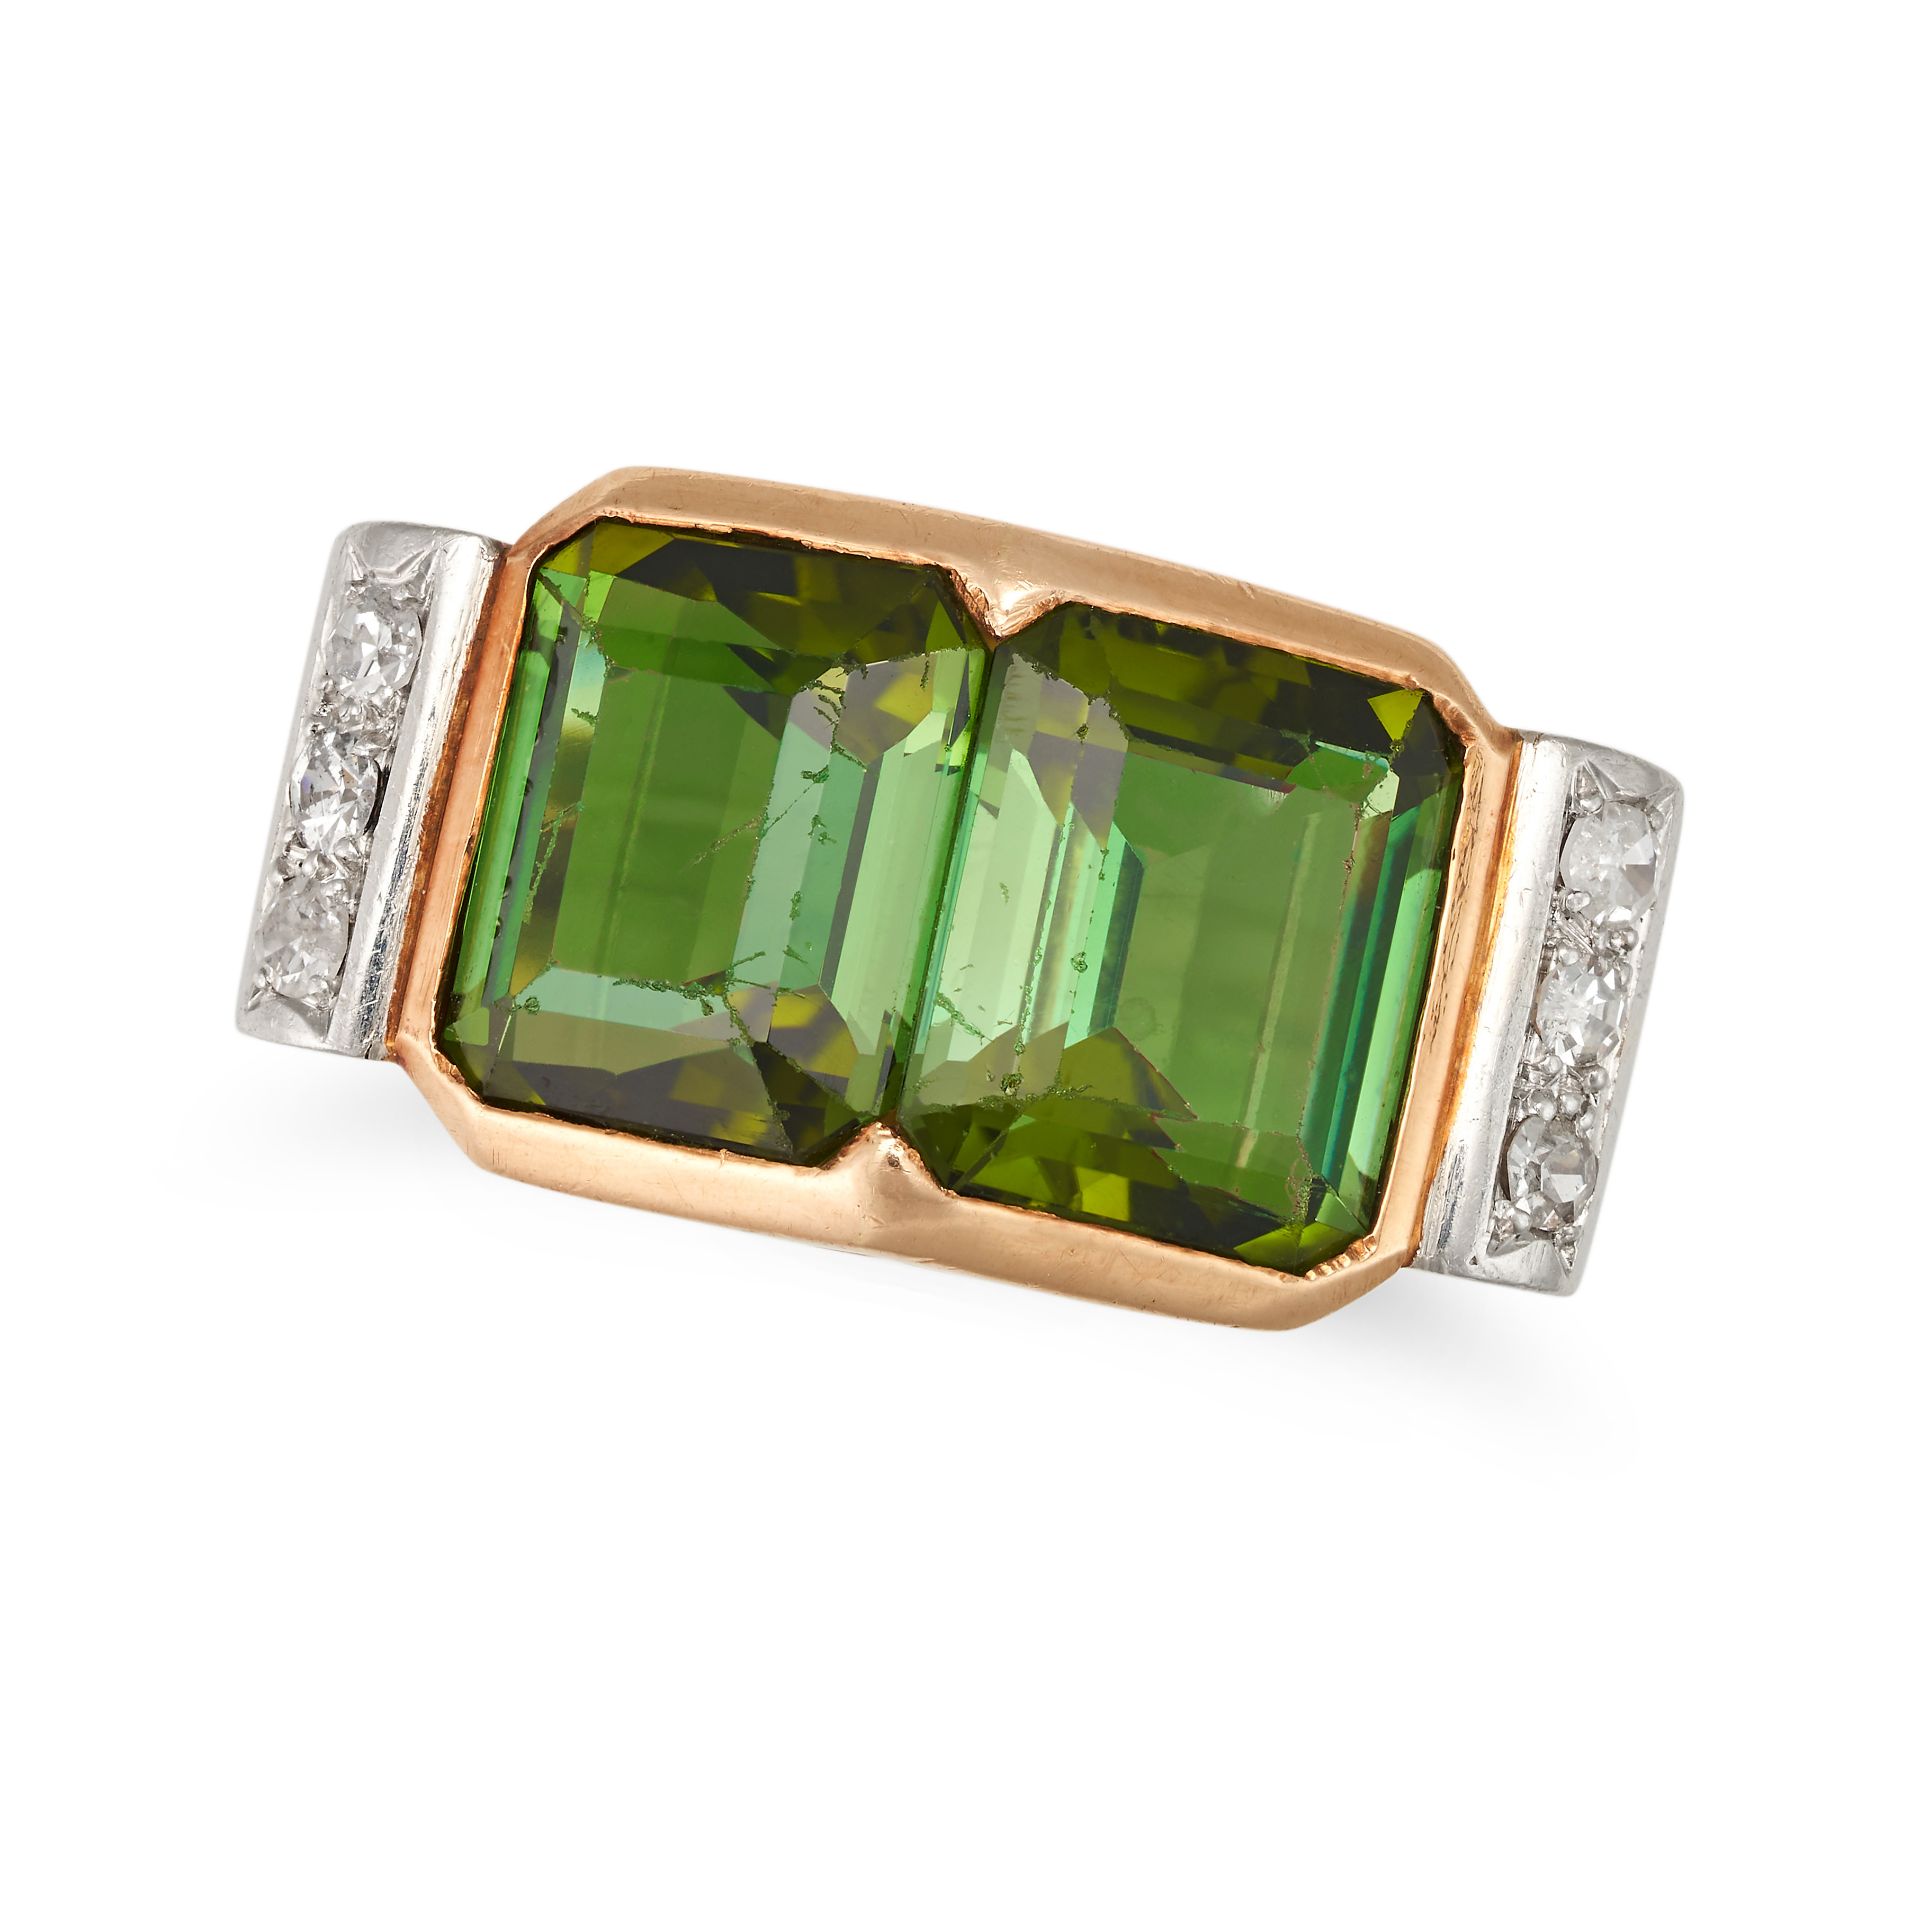 A RETRO GREEN TOURMALINE AND DIAMOND RING in yellow and white gold, set with two octagonal step c...